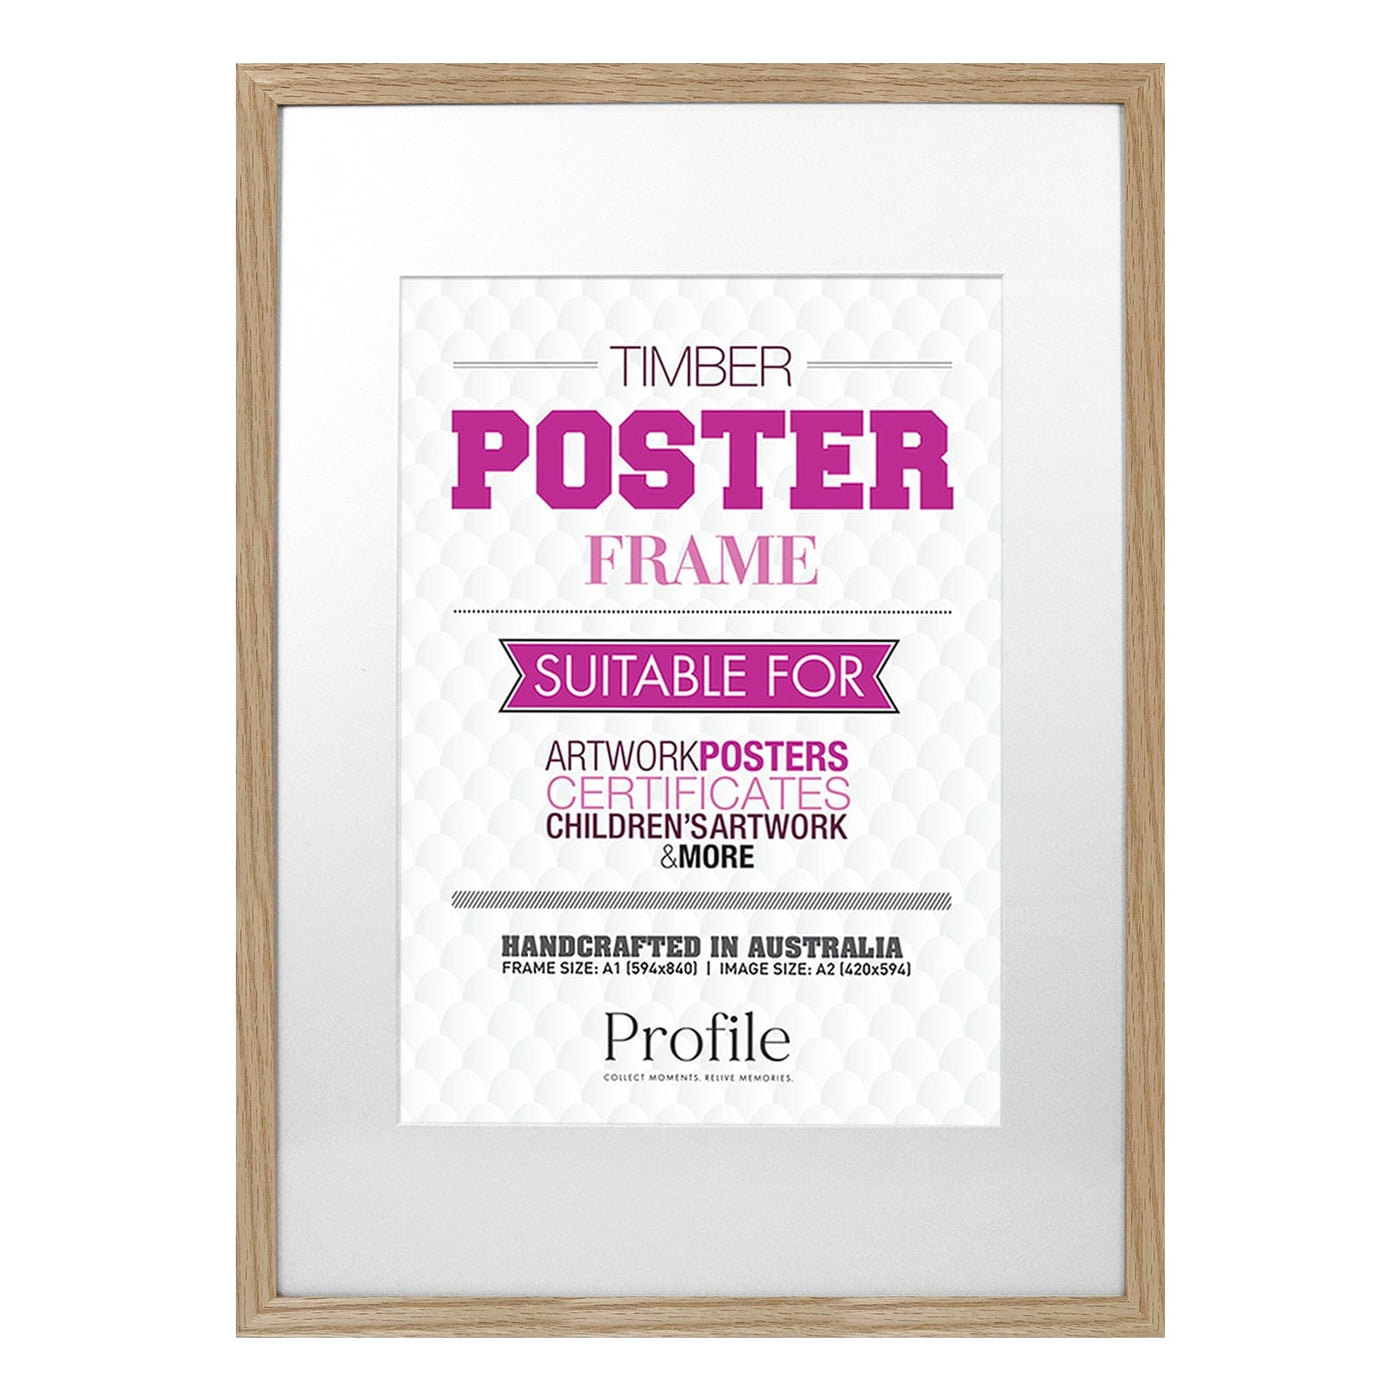 Classic Natural Oak Poster Frame A1 (59x84cm) to suit A2 (42x59cm) image from our Australian Made Picture Frames collection by Profile Products Australia